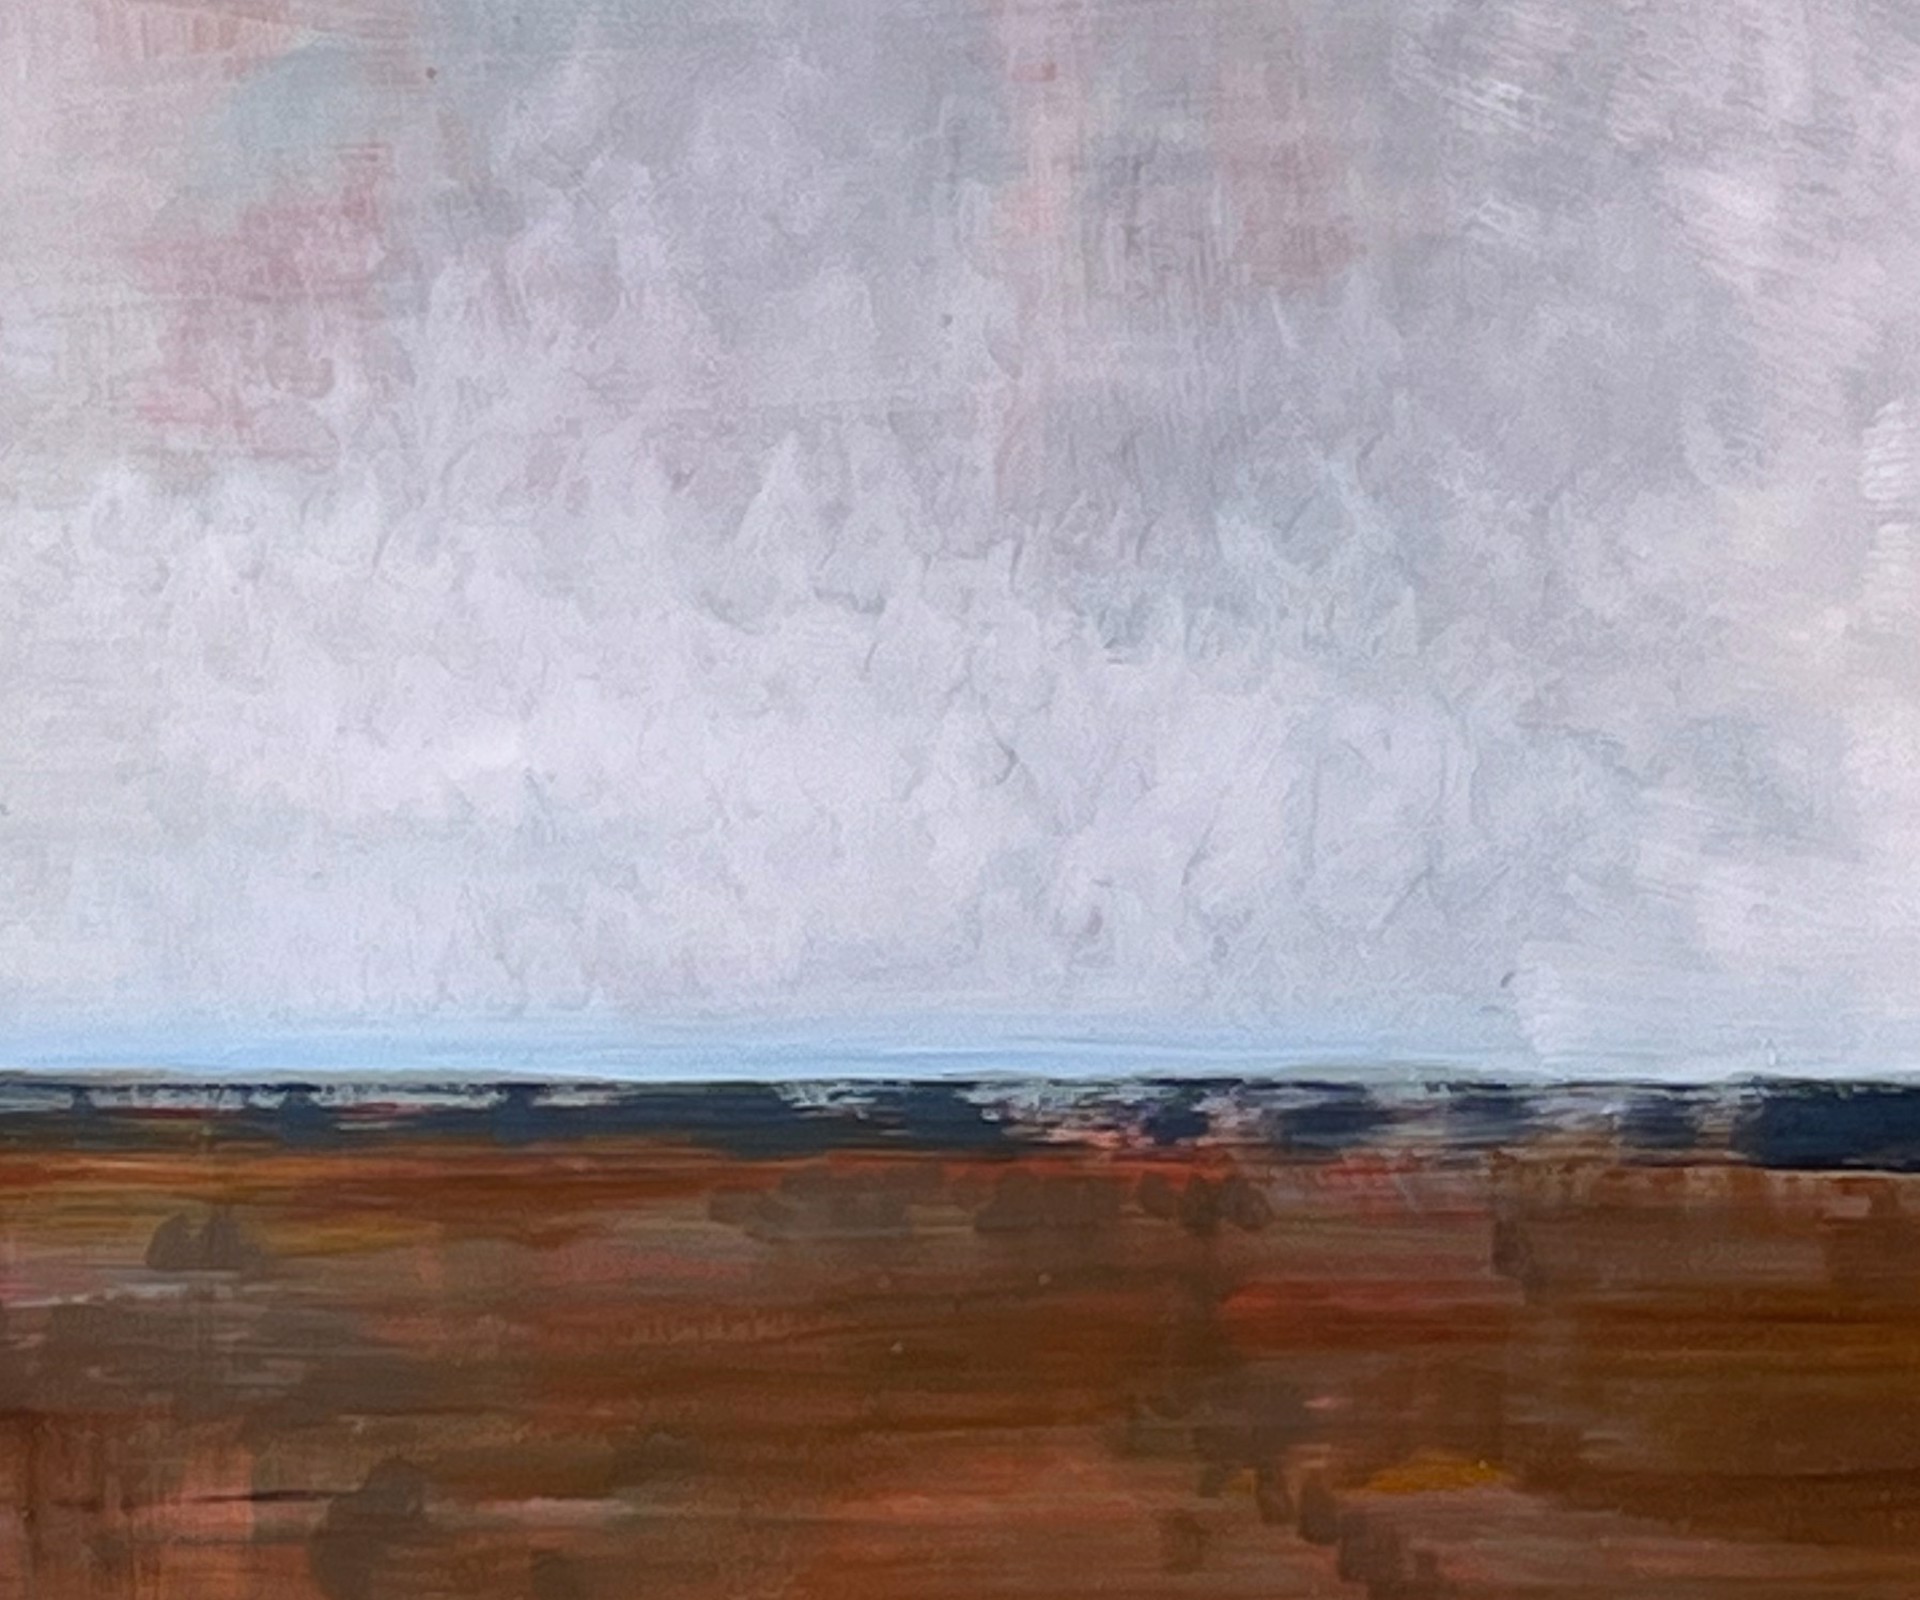 Oil painting of a landscape showing a broad plain and a cloudy sky